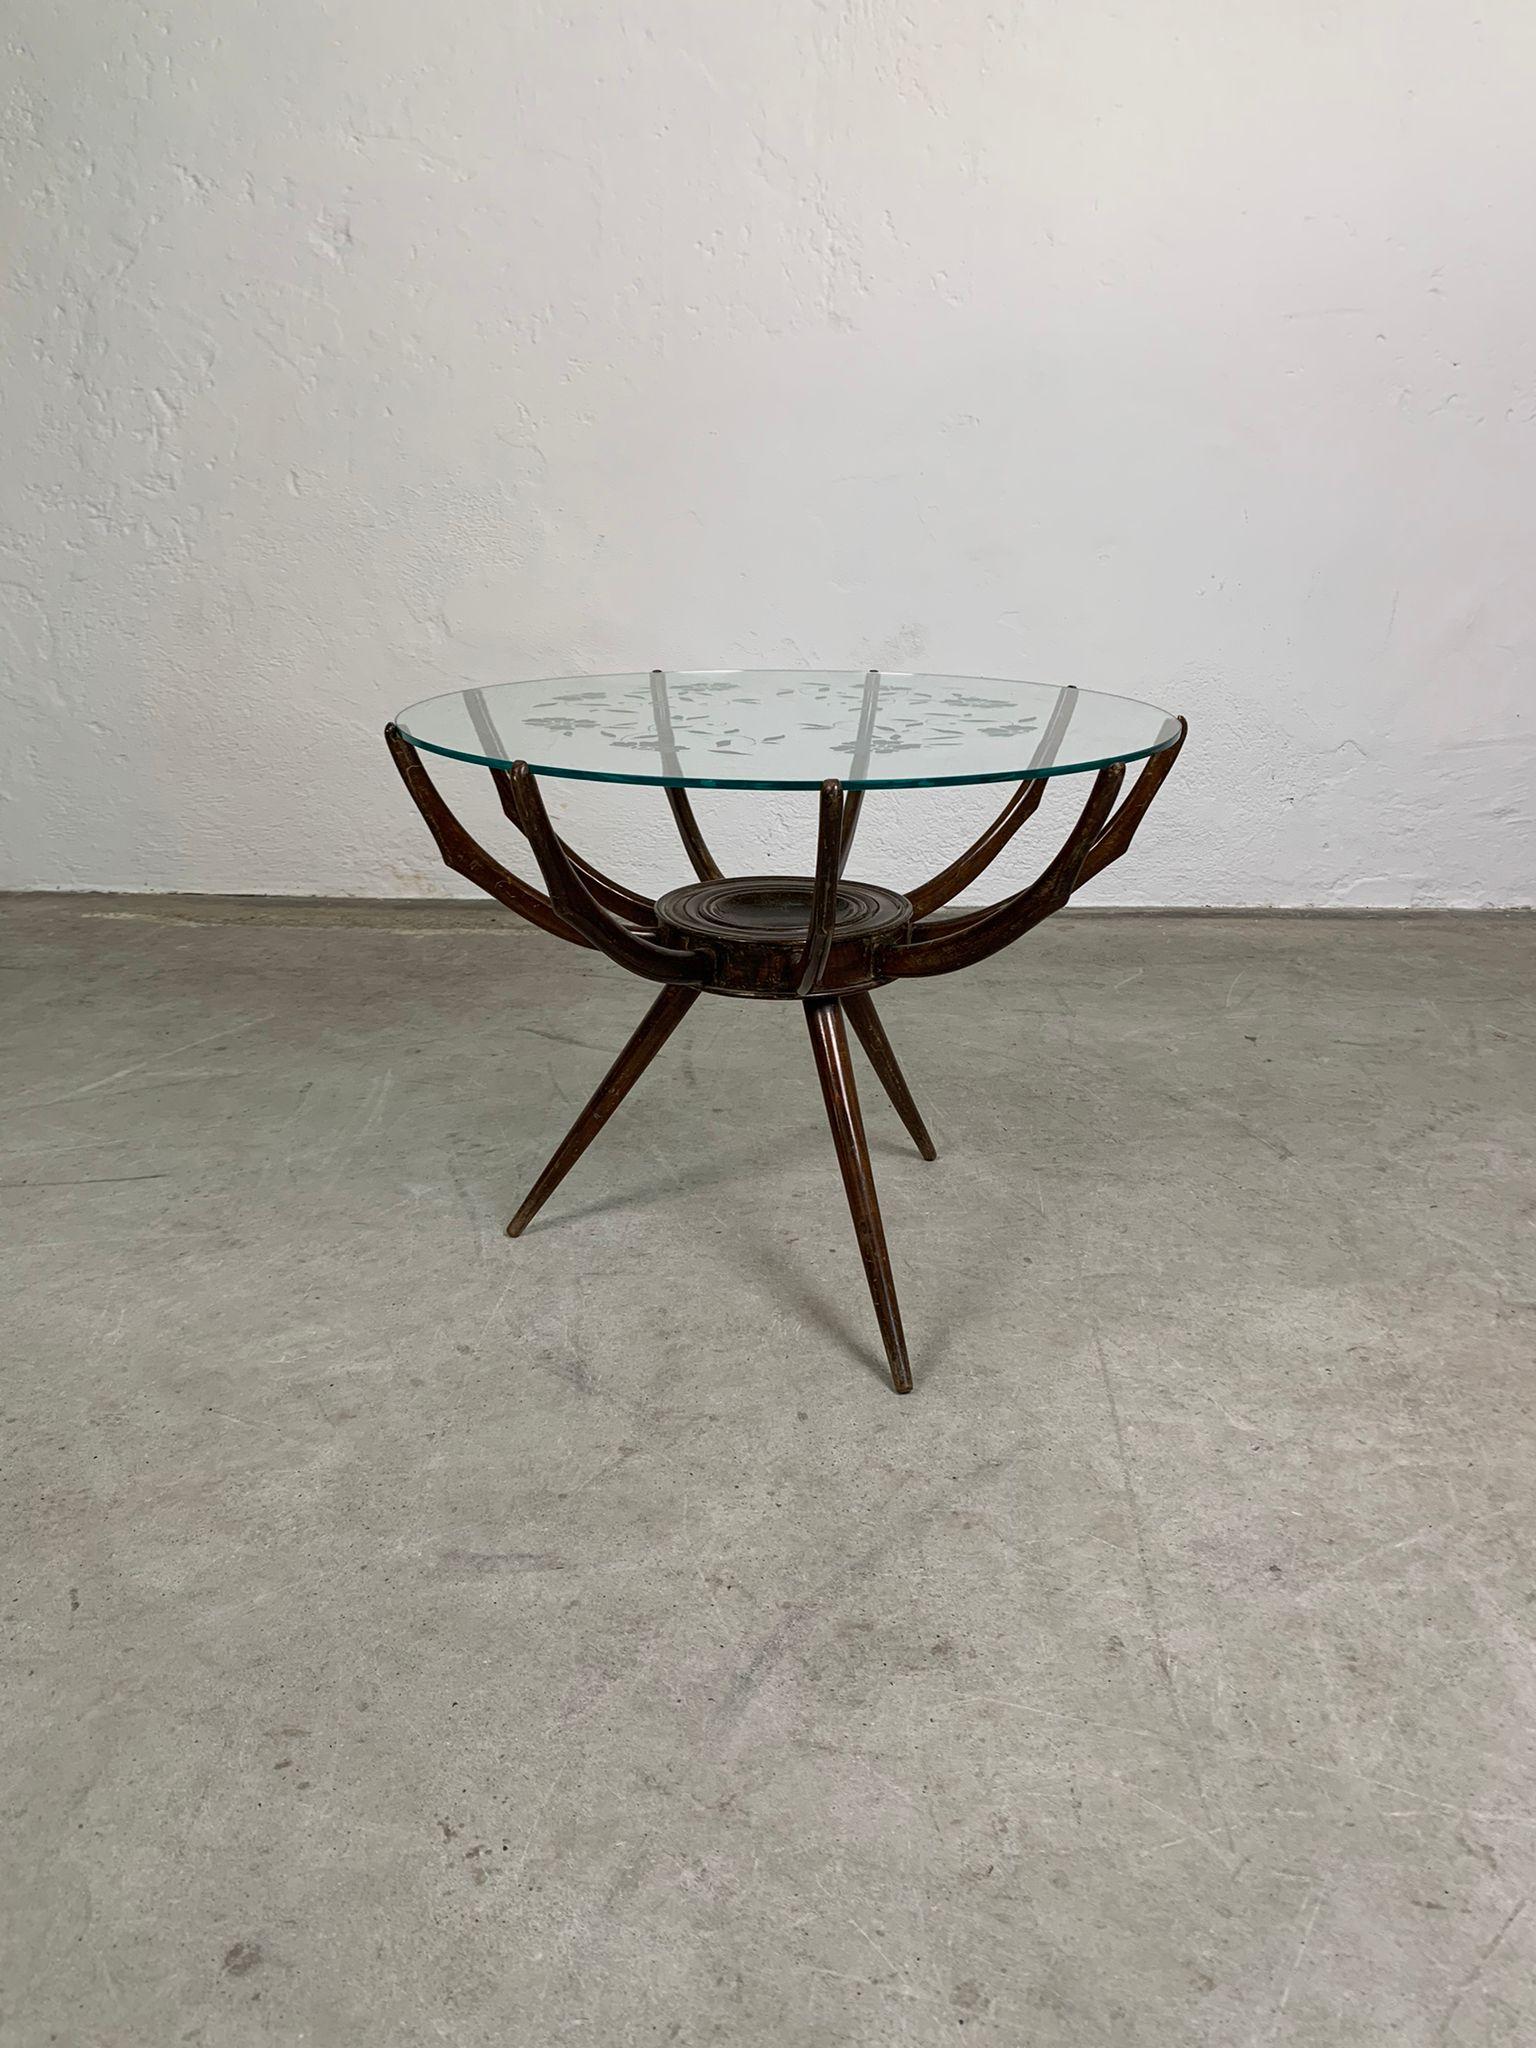 Round crystal and wooden structure coffee table by Carlo de Carli, 1950s Carlo de Carli, 1950s

Circular coffee table with round crystal top with printed floral pattern, wooden frame with nine arms supporting the glass and three legs at the base.